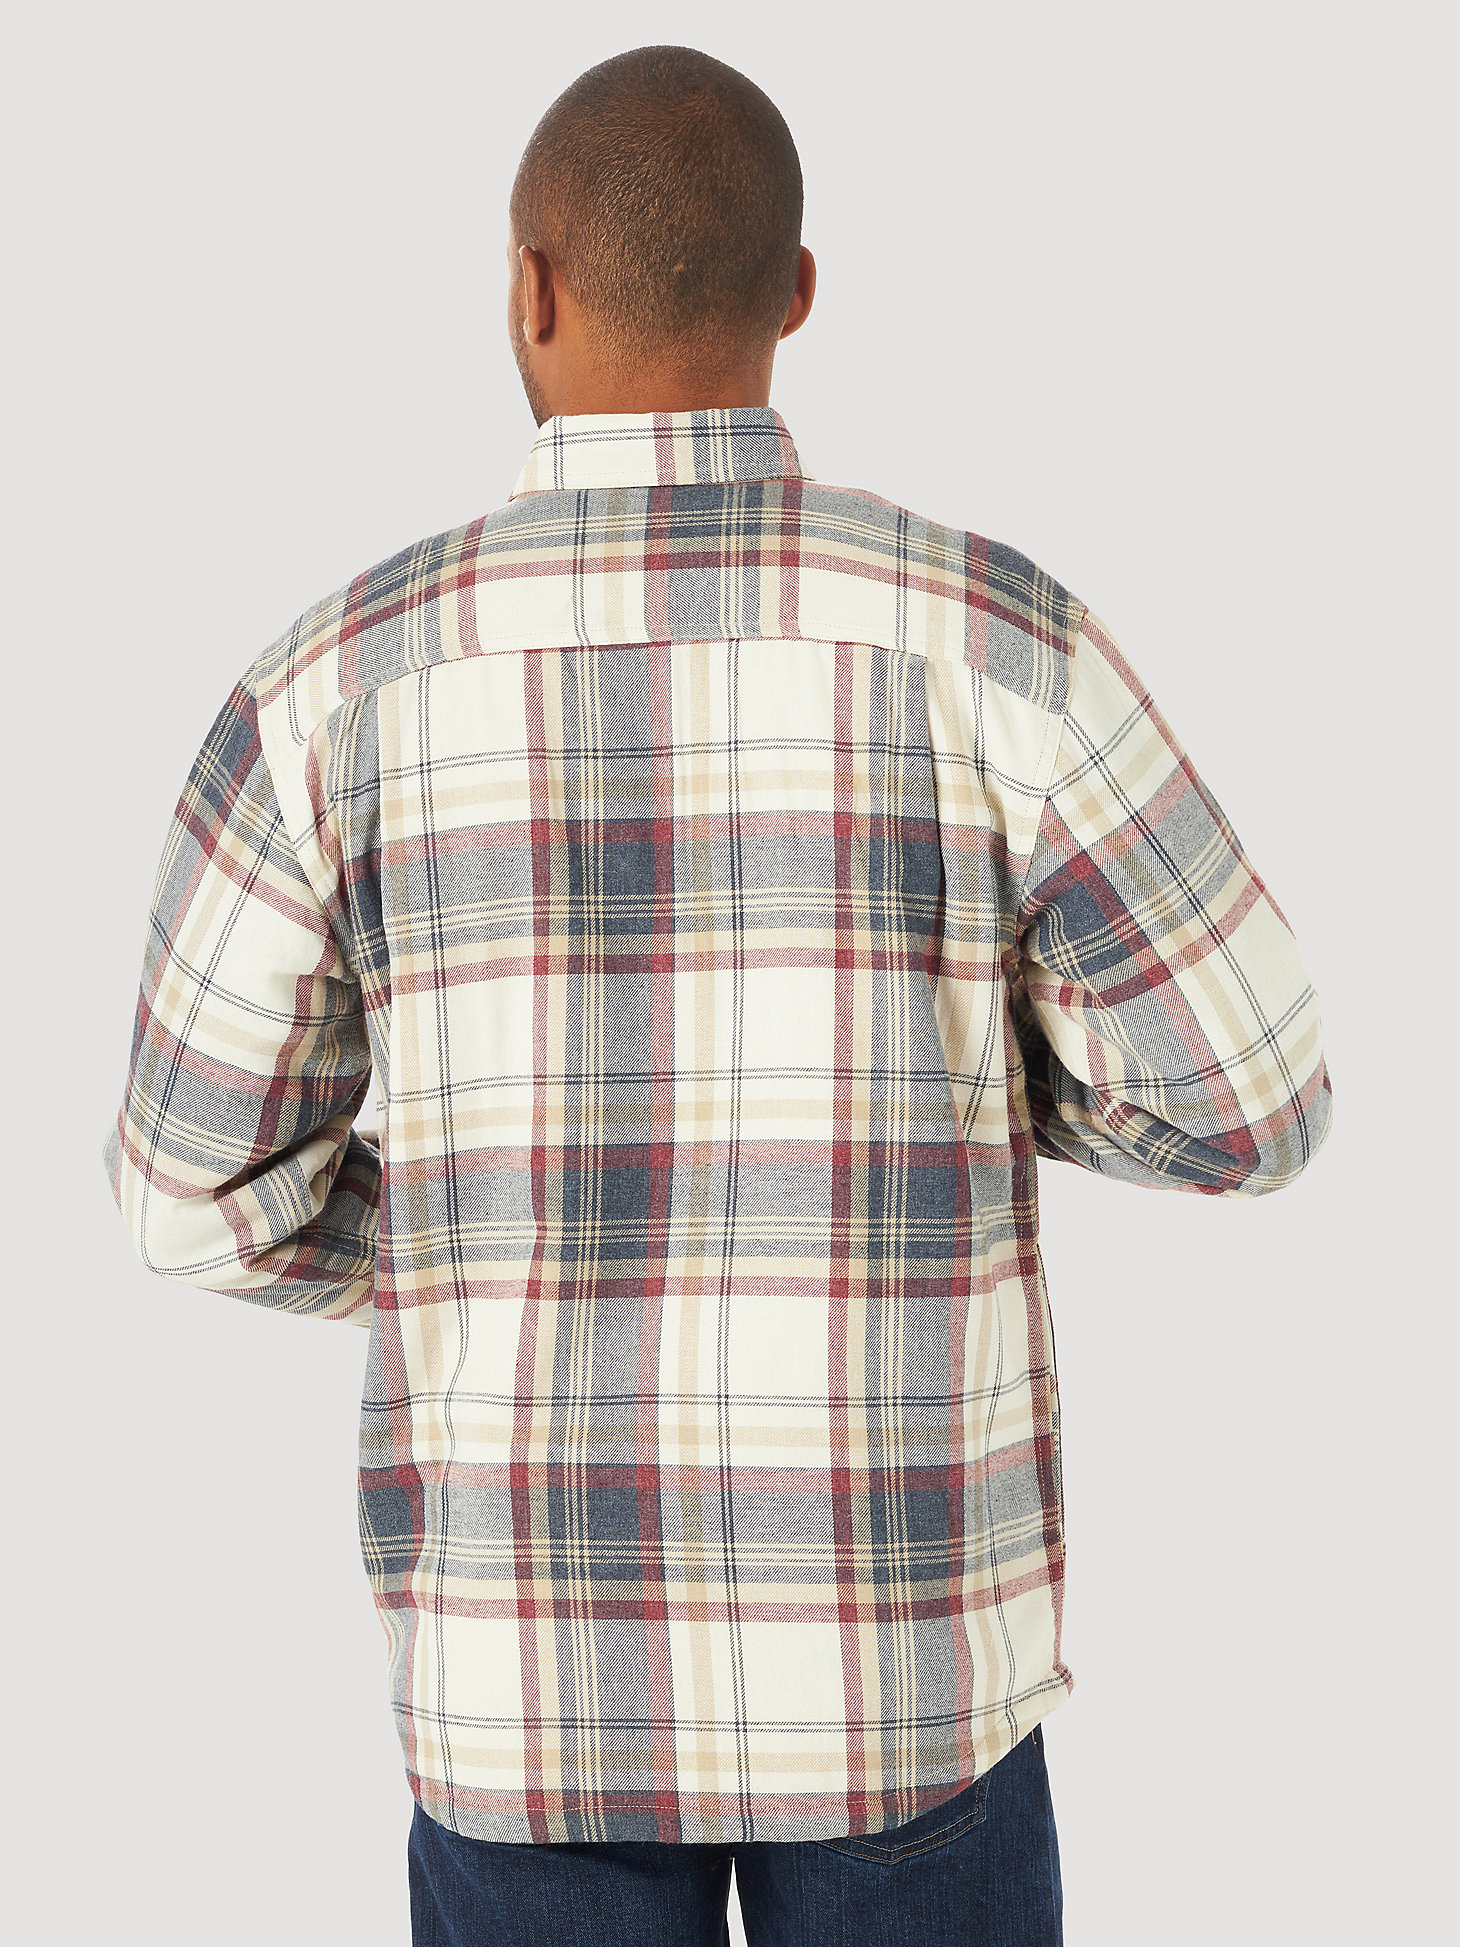 Men's Wrangler® Authentics Sherpa Lined Flannel Shirt in Twill Heather alternative view 1